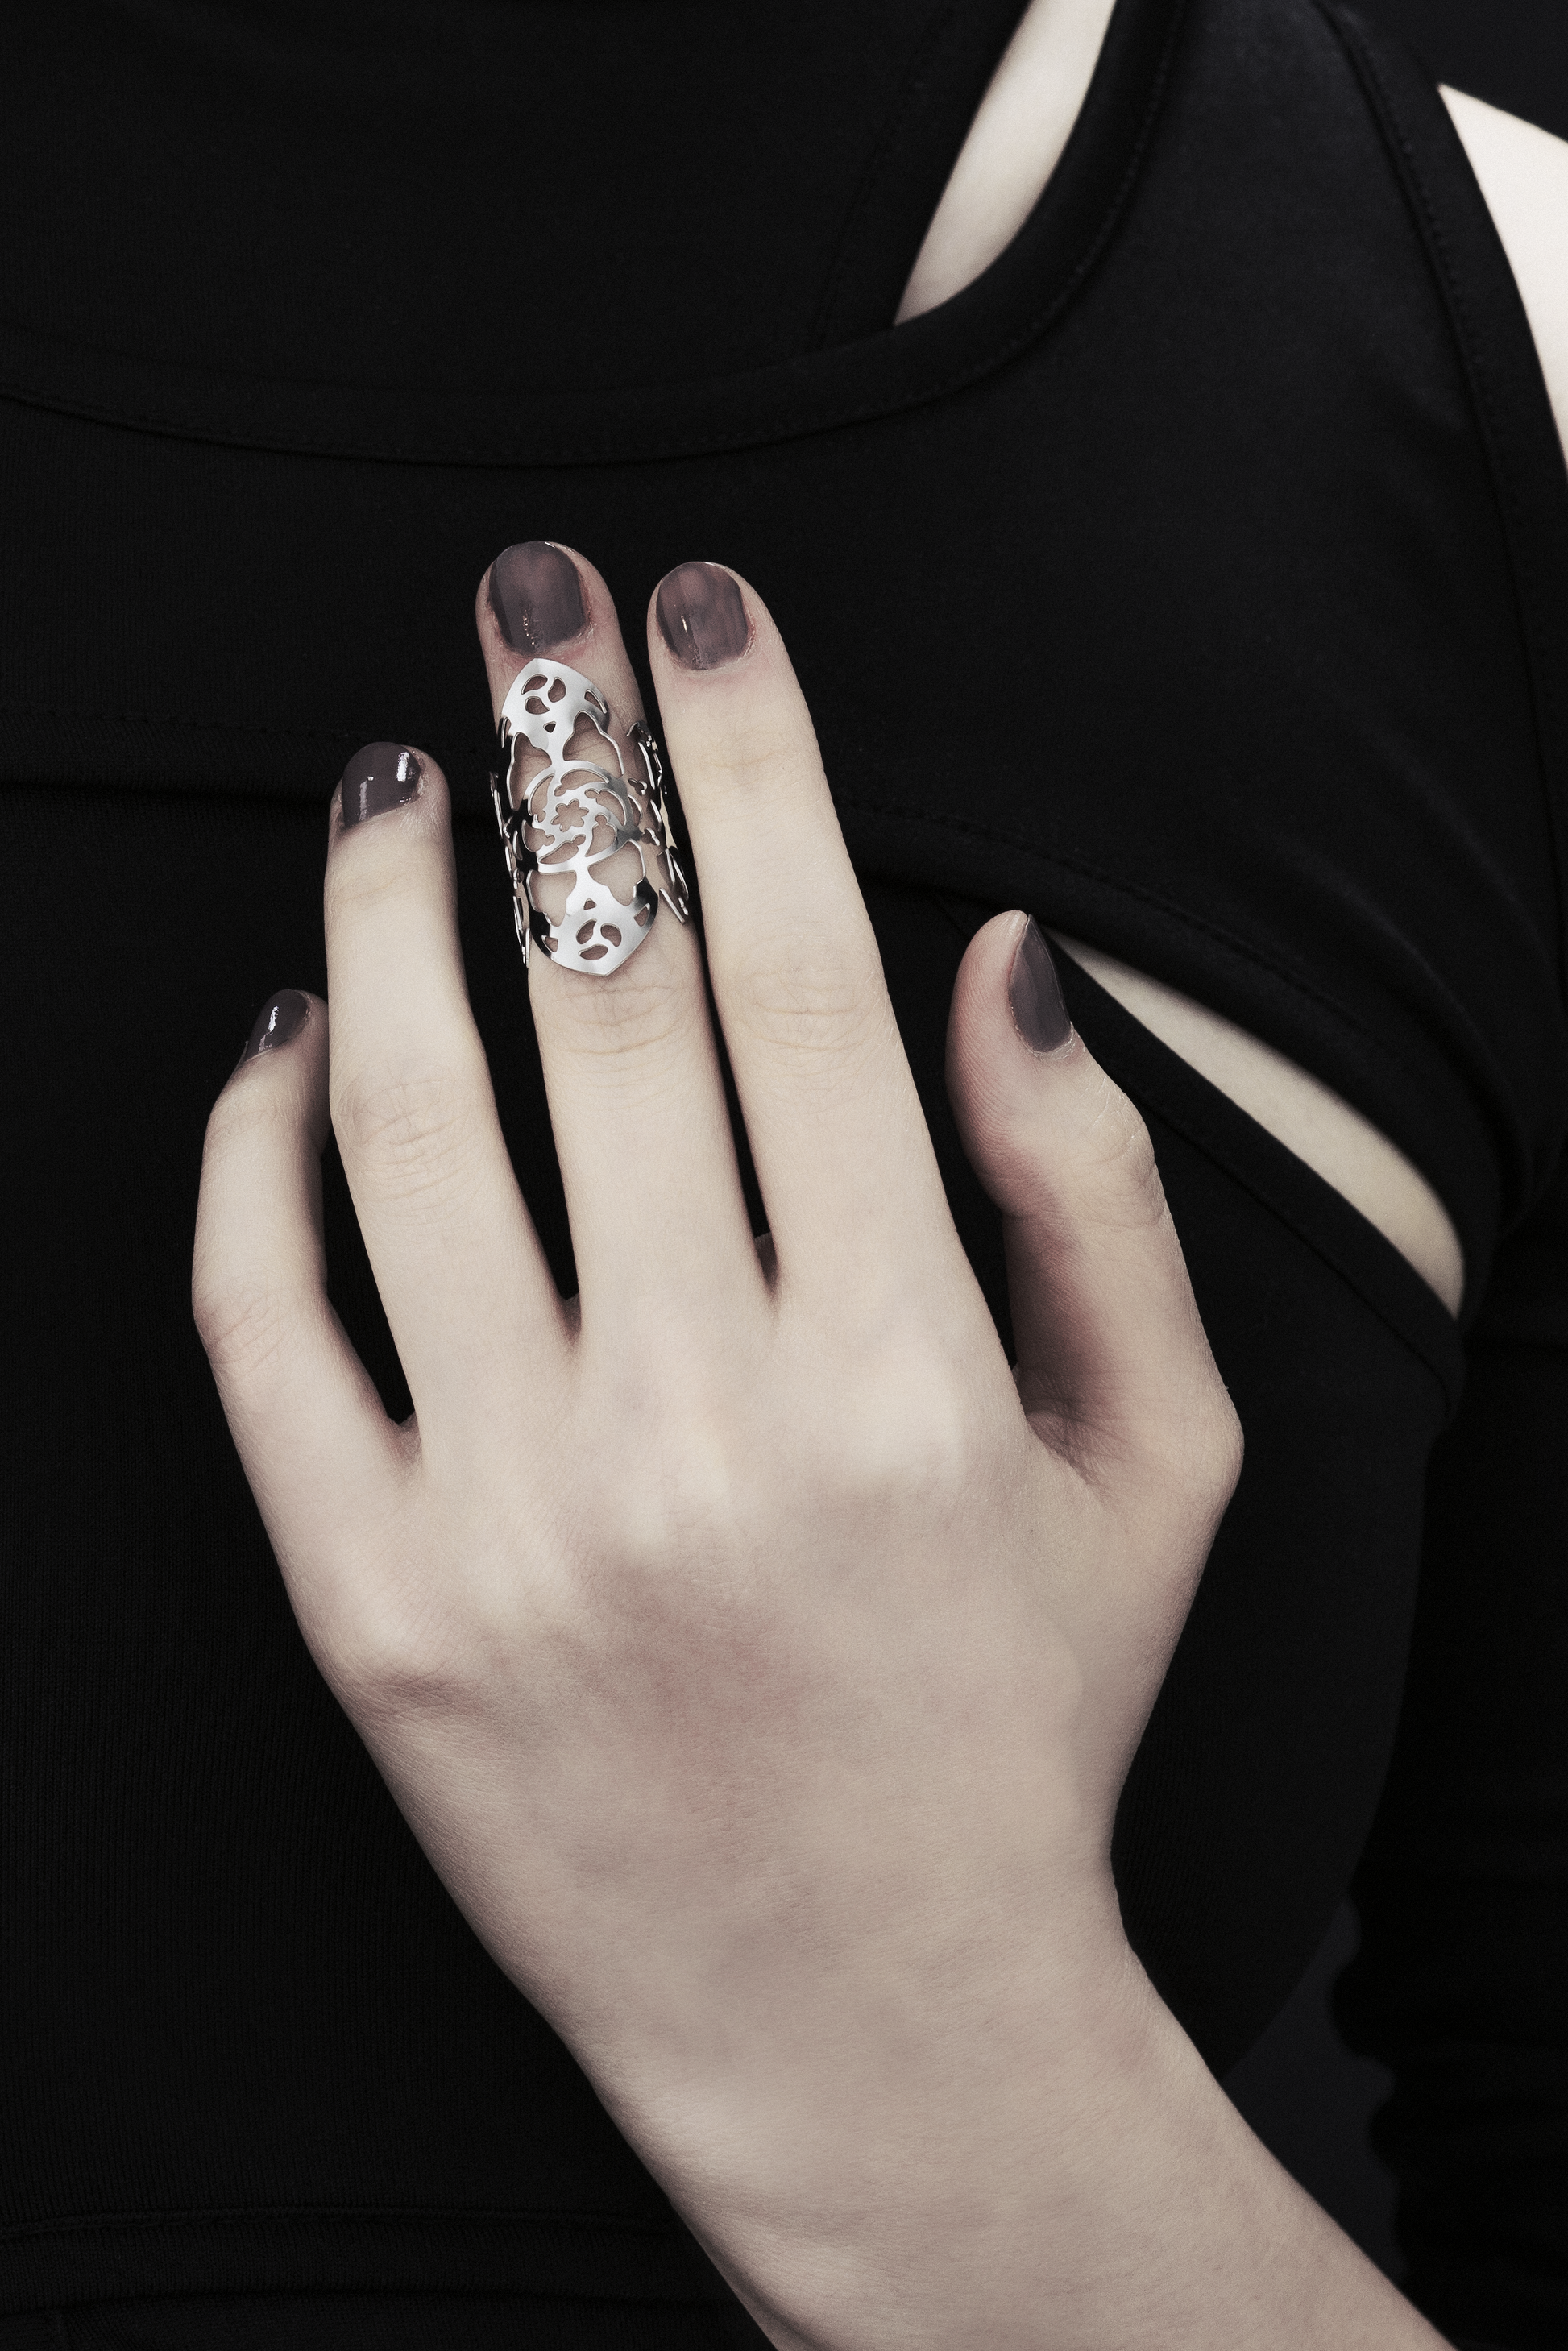 A model wears a Myril Jewels gothic architecture-inspired midi ring on her middle finger, complementing her dark manicure and black, cut-out shoulder top. The ring's intricate design and silver finish echo the sophisticated, dark-avantgarde style, perfect for fans of neo-gothic and gothic-chic jewelry. This piece blends seamlessly with a witchcore aesthetic, making it suitable for Halloween, everyday wear, and as a distinctive accessory for rave parties and festivals.